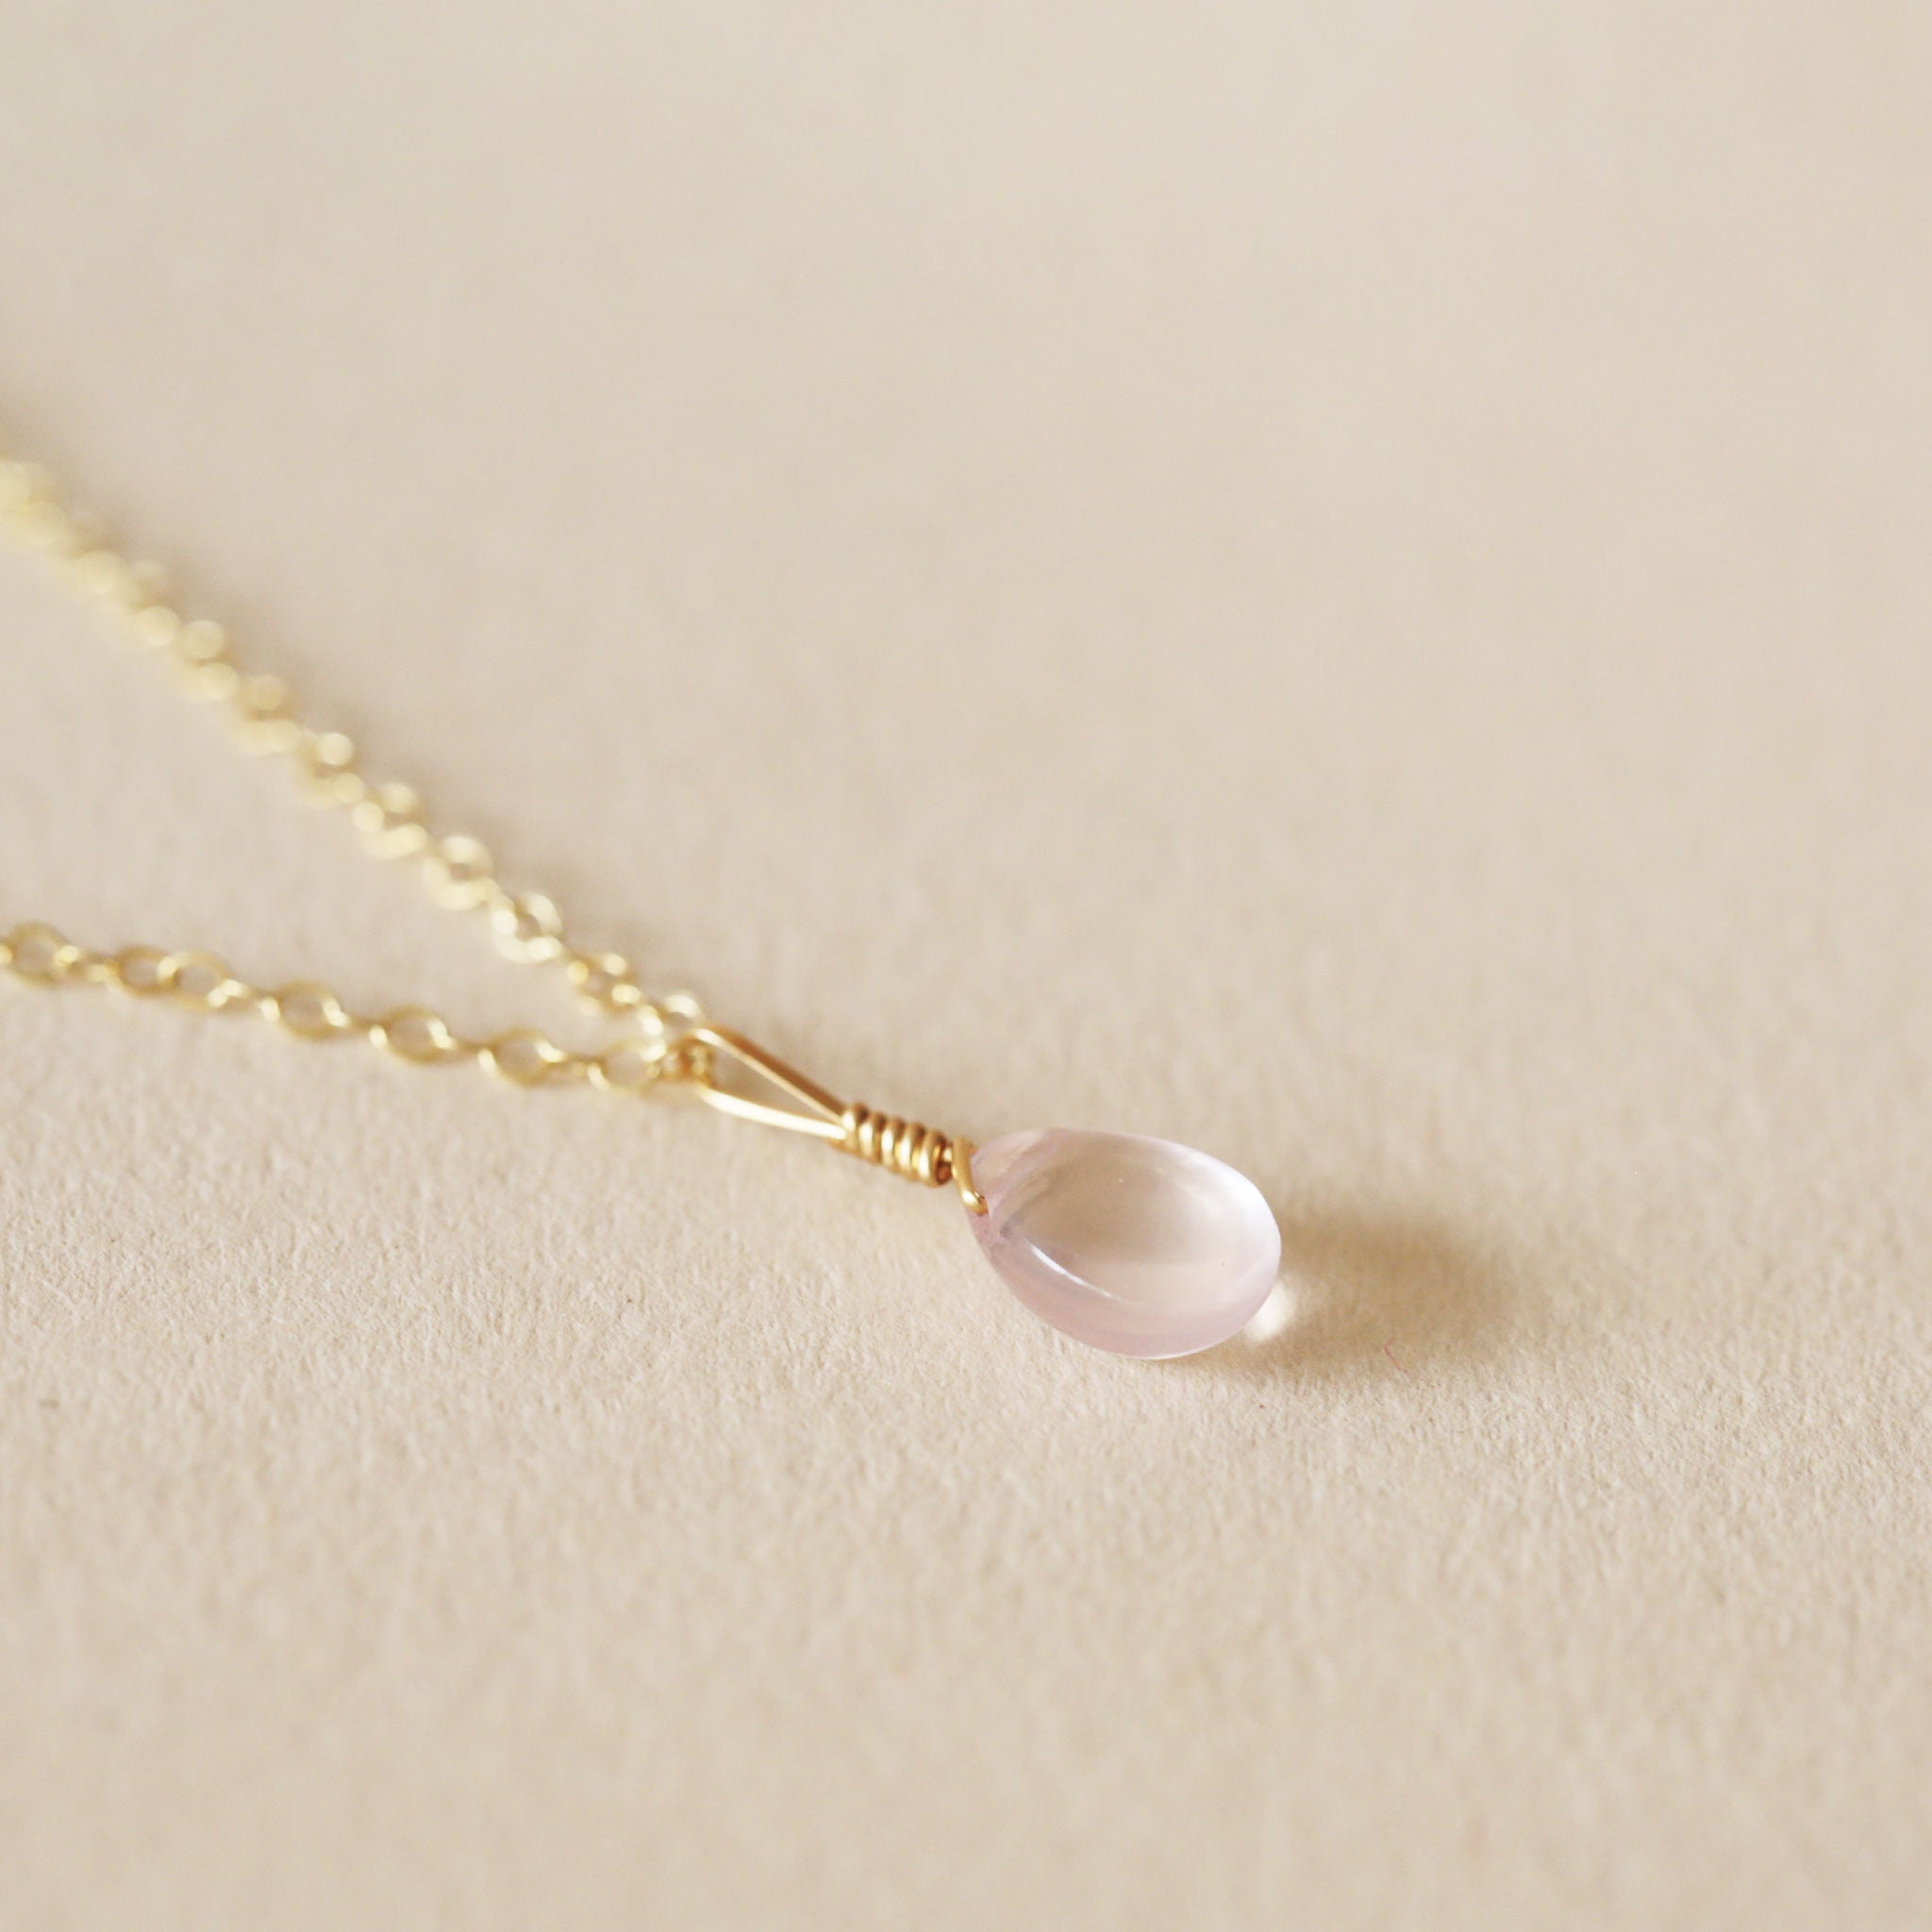 On a neutral background is a gold chain necklace with a rose quartz stone in the center. 